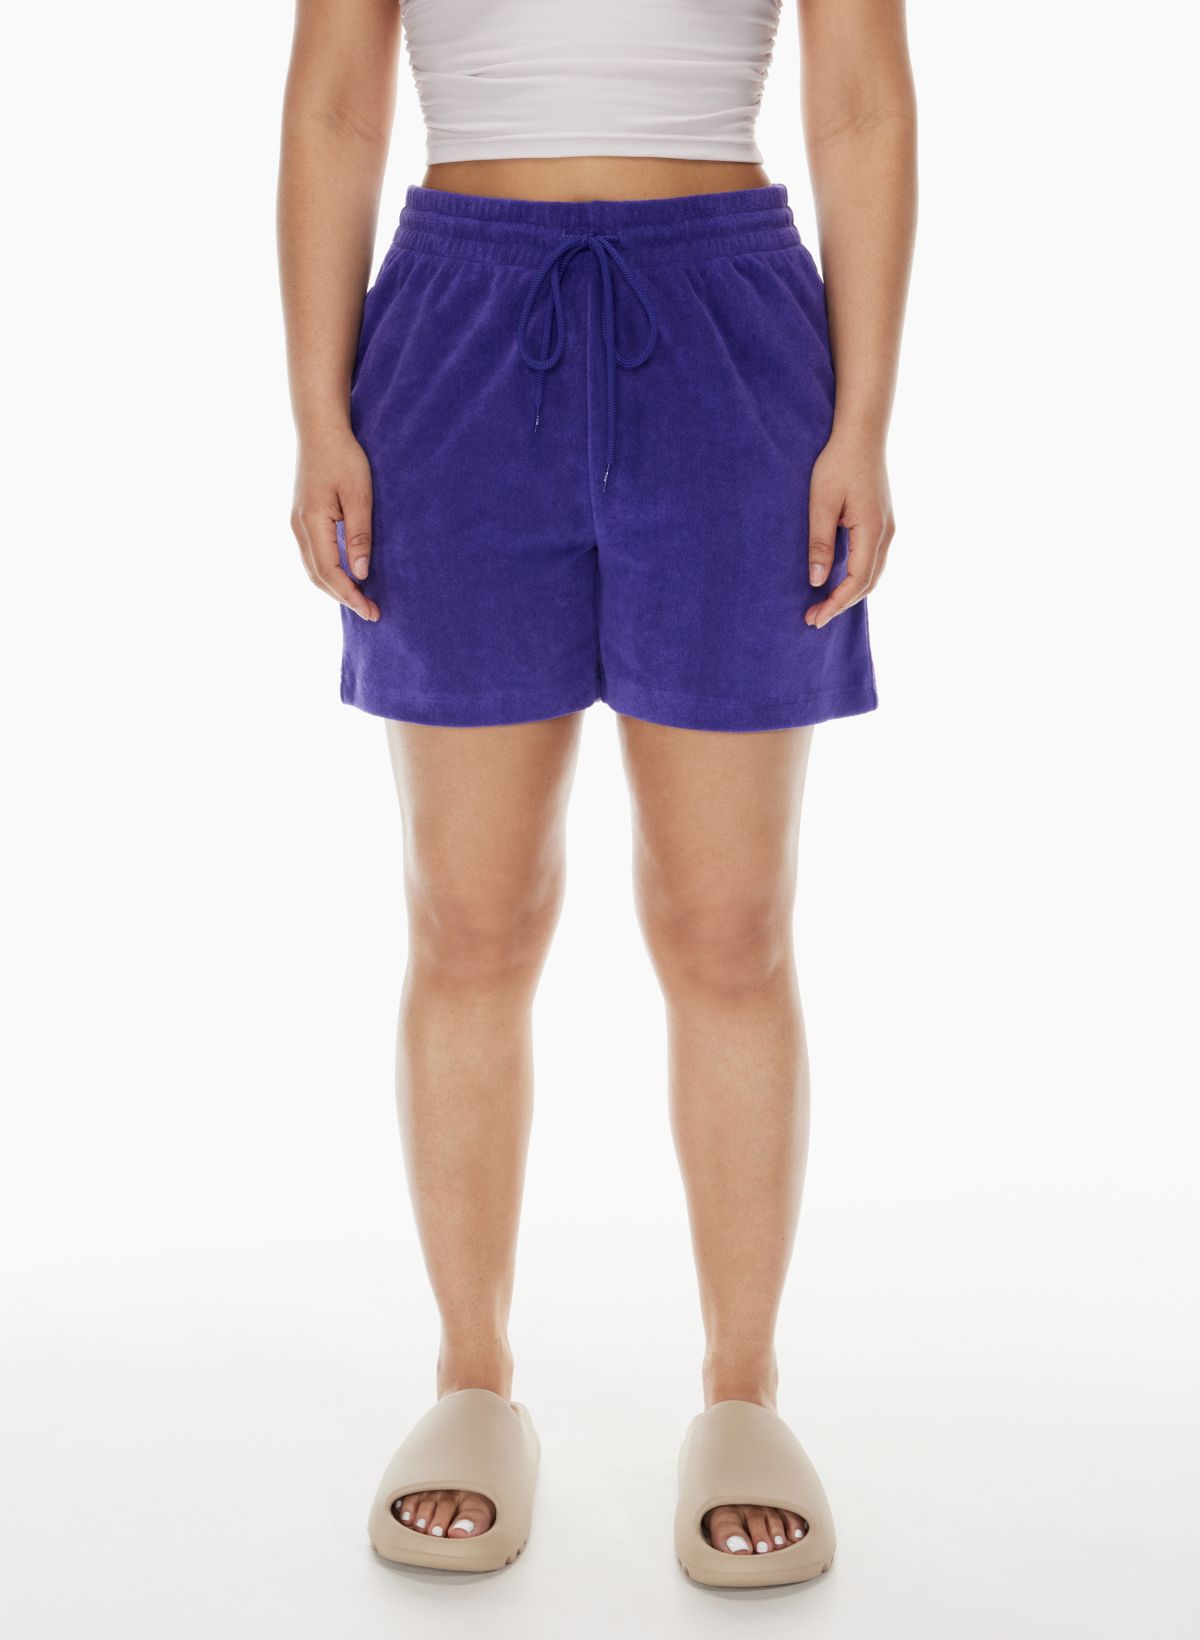 Aritzia TnaBUTTER 5” Shorts Styling & Review, Gallery posted by  yasminmoradi